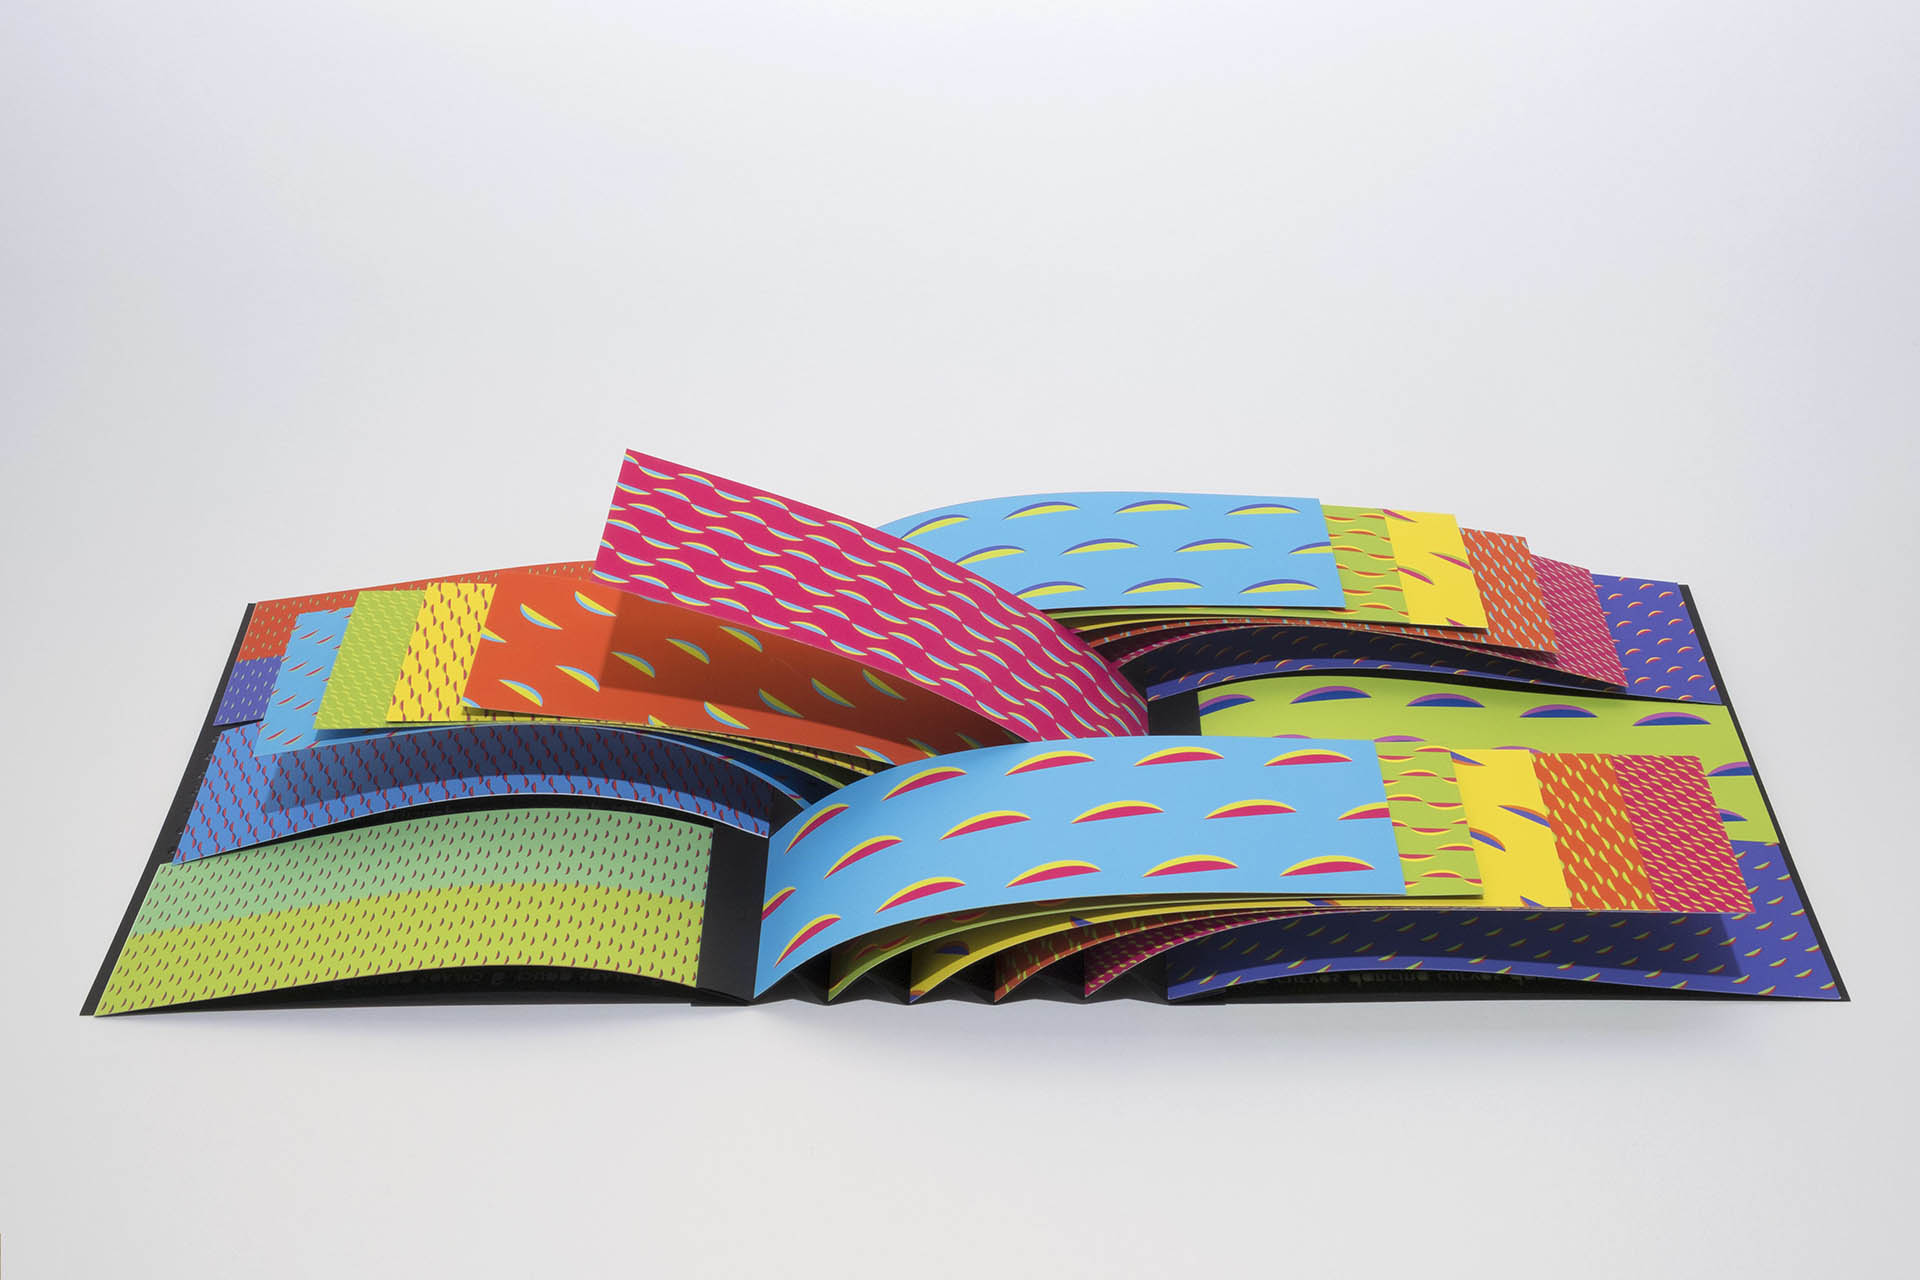 Dancing curves is an experimental book using design and book binding to create a playful and highly interactive concept